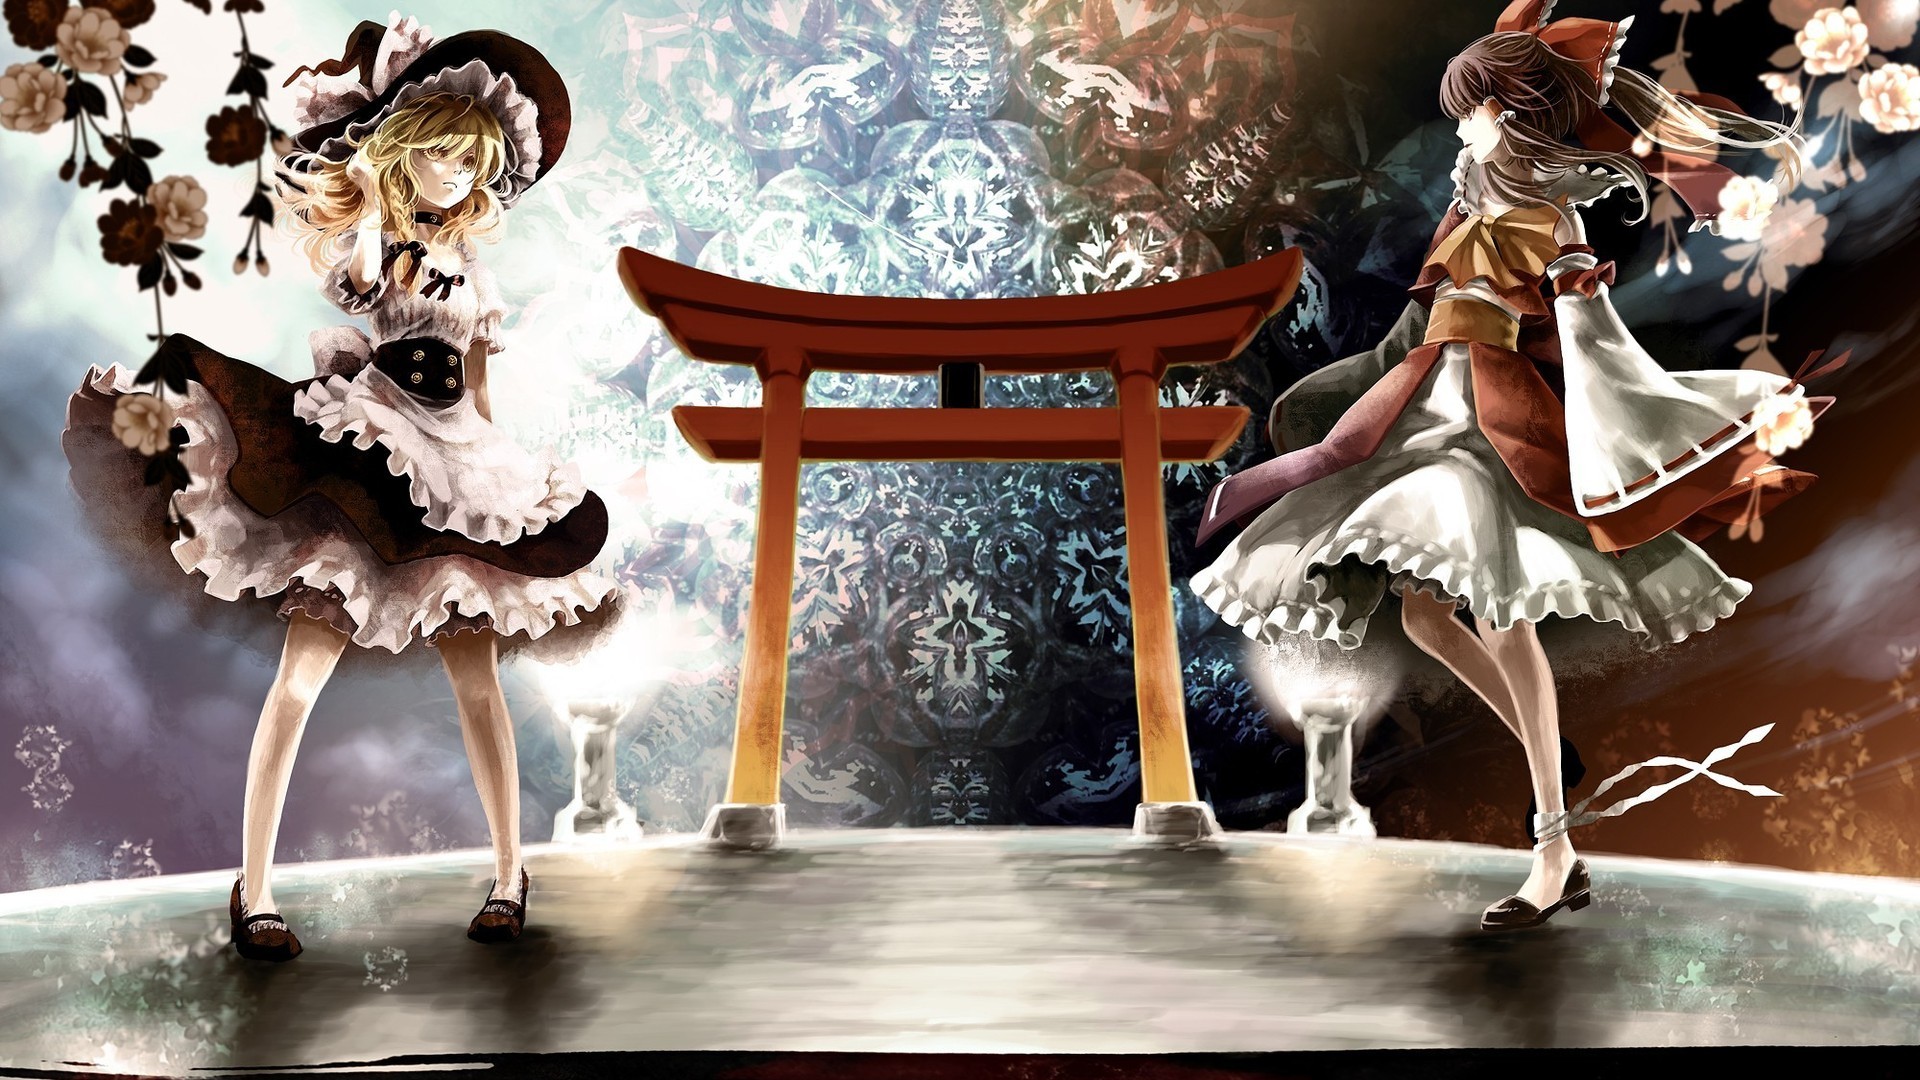 Anime 1920x1080 Touhou dress Asia witch hat anime girls anime blonde two women standing